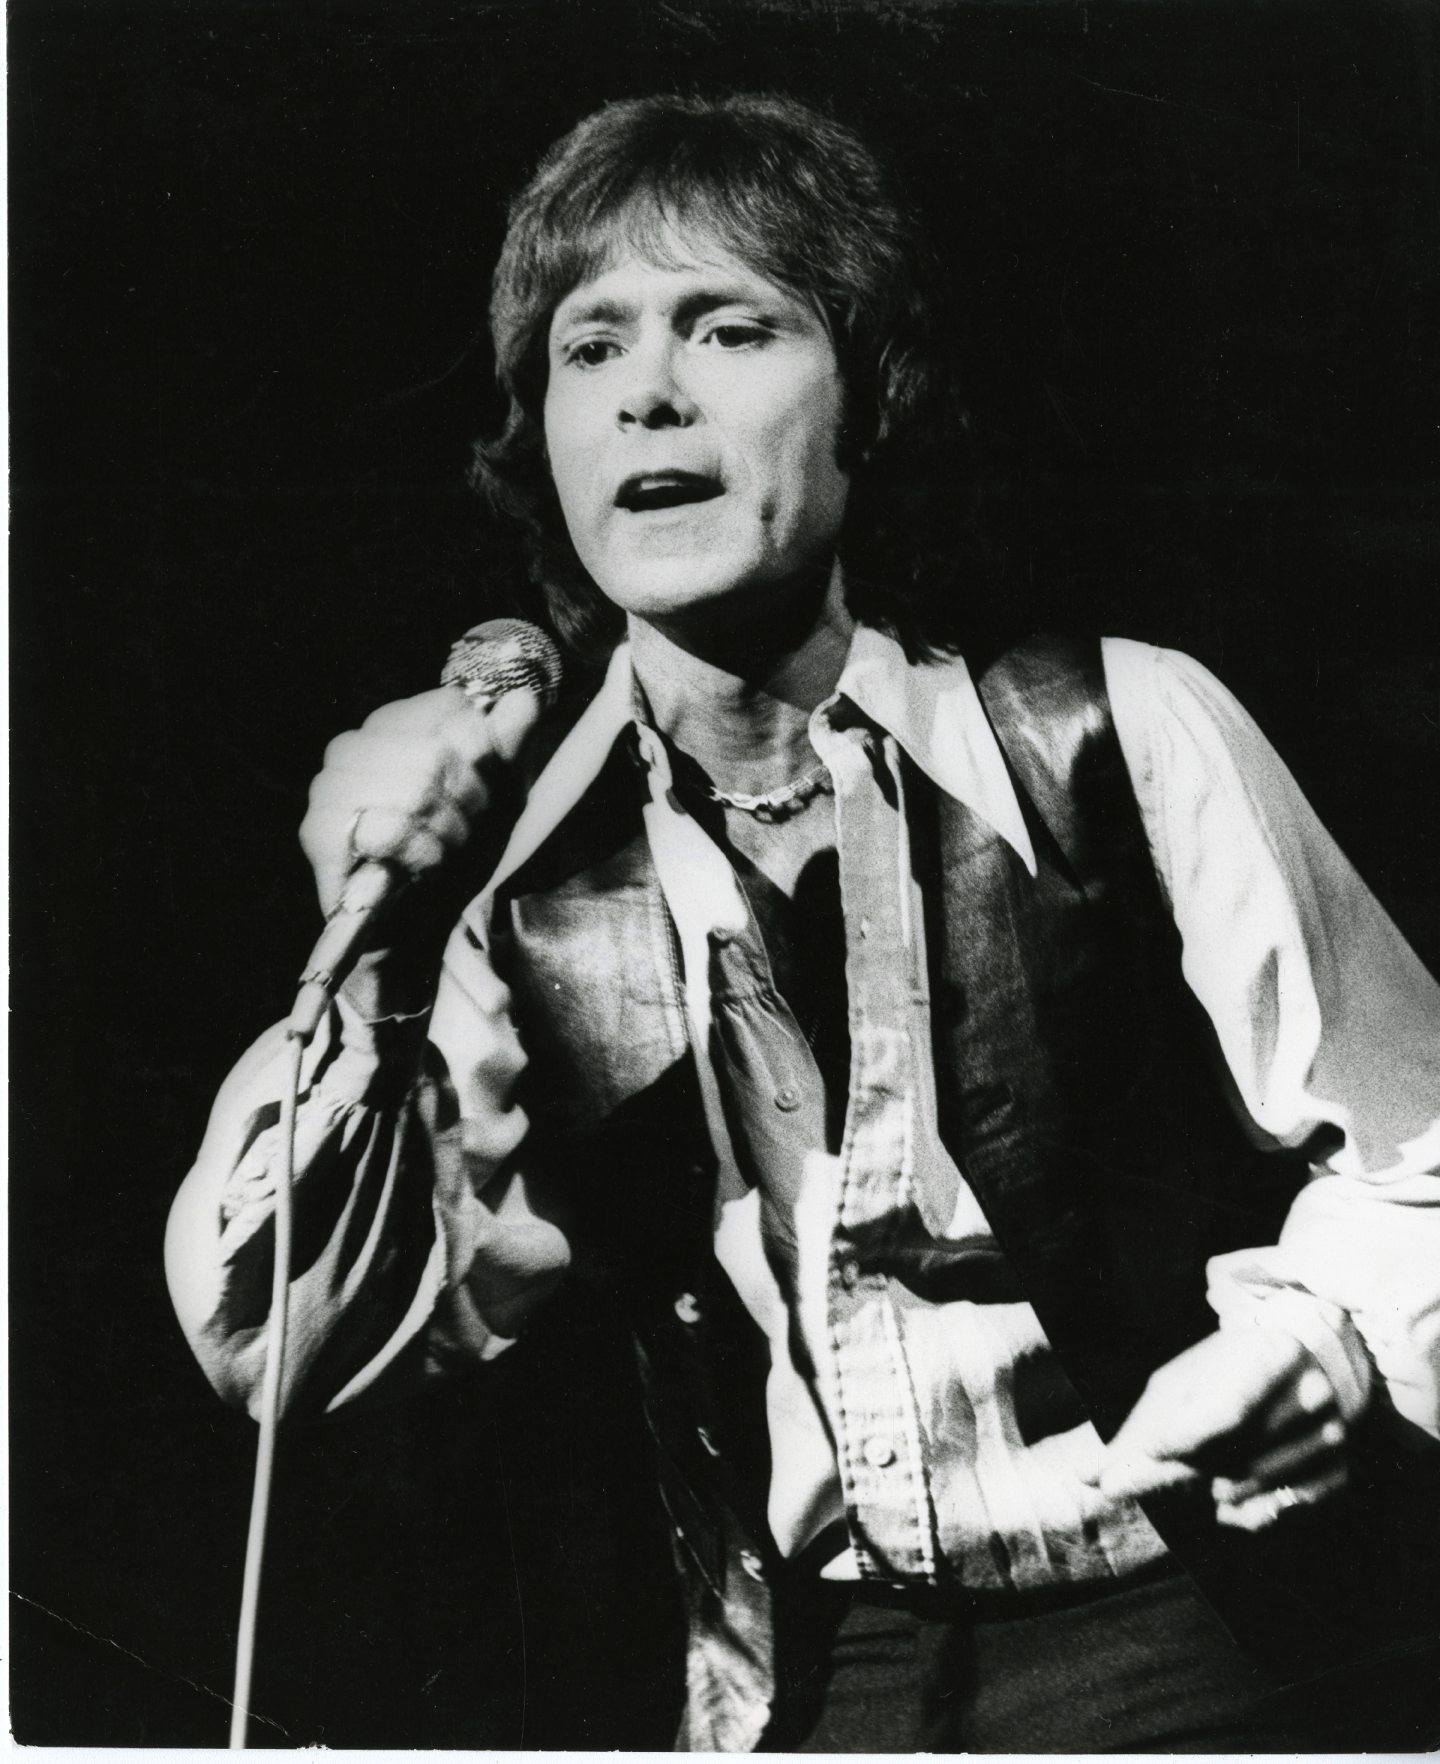 Cliff Richard on stage in October 1978. Image: DC Thomson.